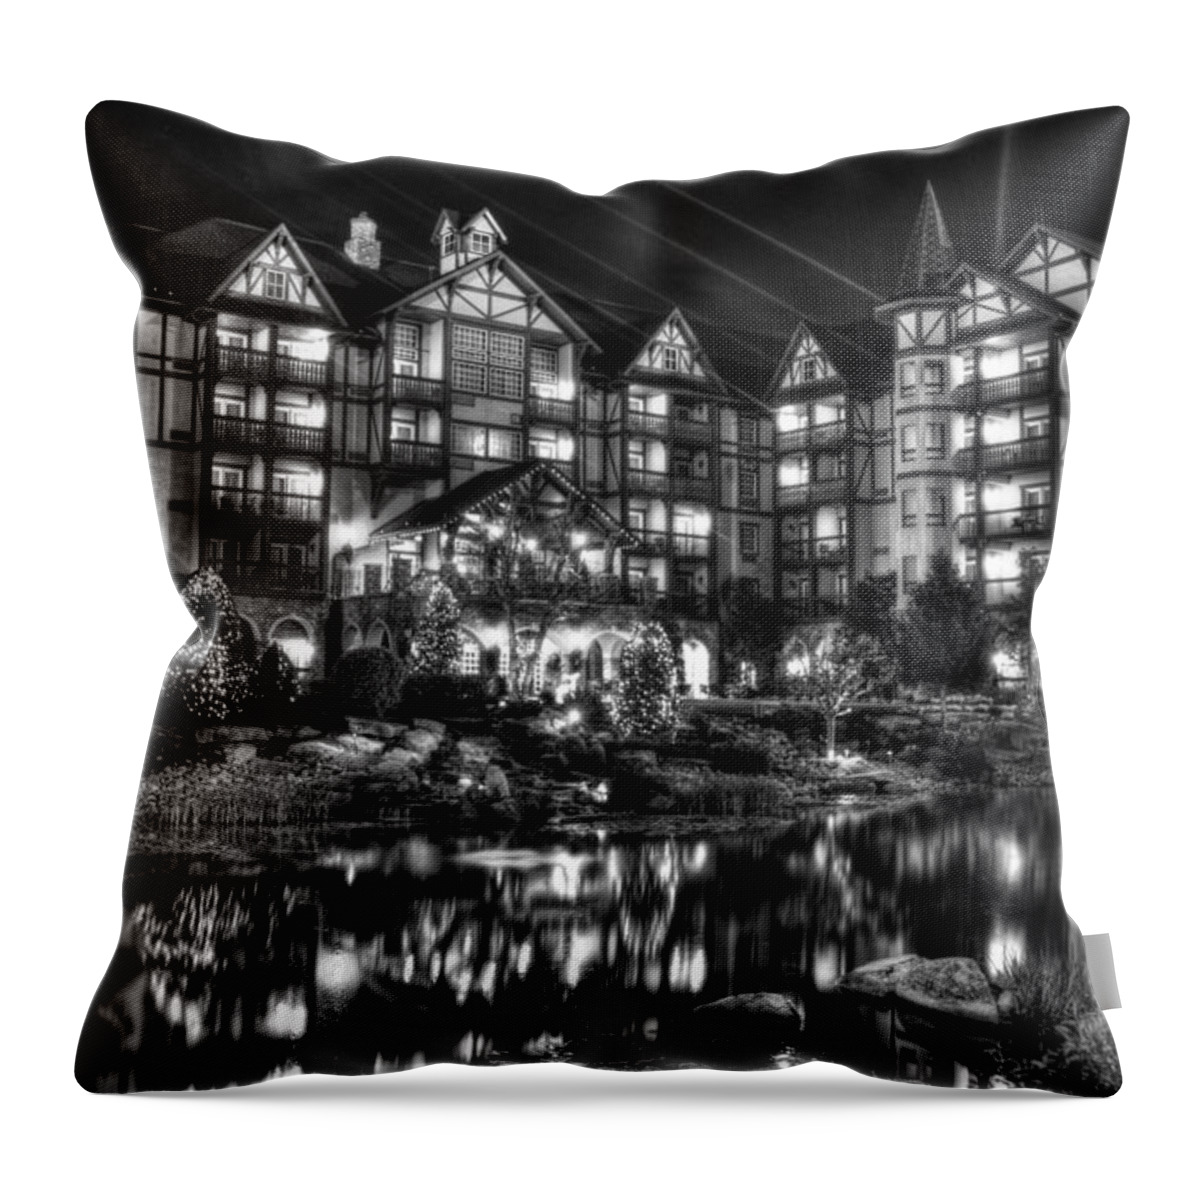 The Inn At Christmas Place Throw Pillow featuring the photograph The Inn at Christmas Place Night by Greg and Chrystal Mimbs